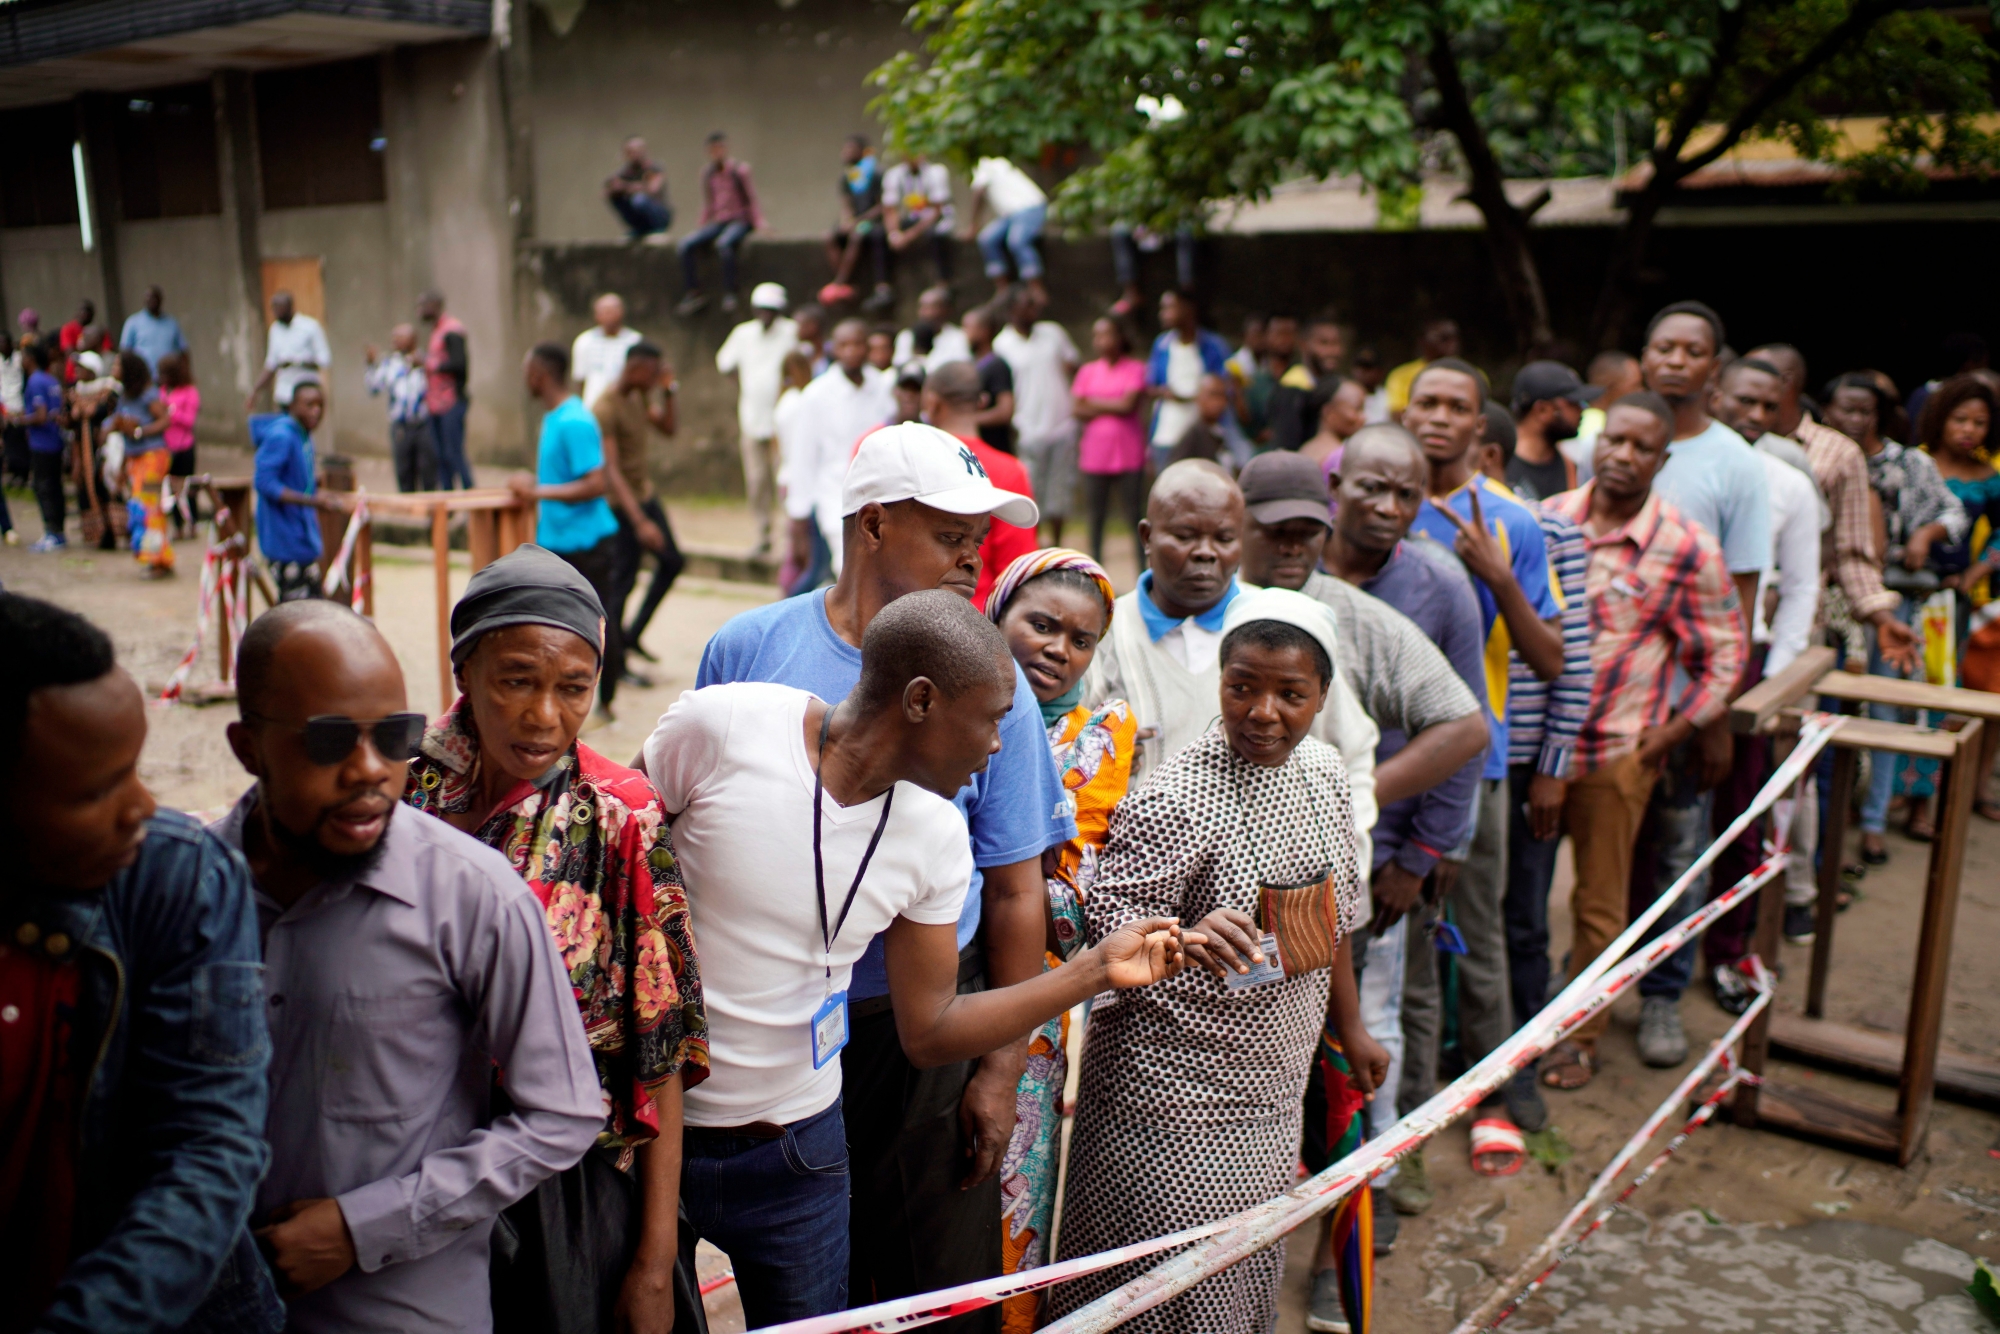 Congolese voters who have been waiting at the St. Raphael school in the Limete district of Kinshasa Sunday Dec. 30, 2018, line up to vote after the voters listings were finally posted five hours after the official start of voting.  Some forty million voters are registered for a presidential race plagued by years of delay and persistent rumors of lack of preparation. (AP Photo/Jerome Delay) Congo Elections